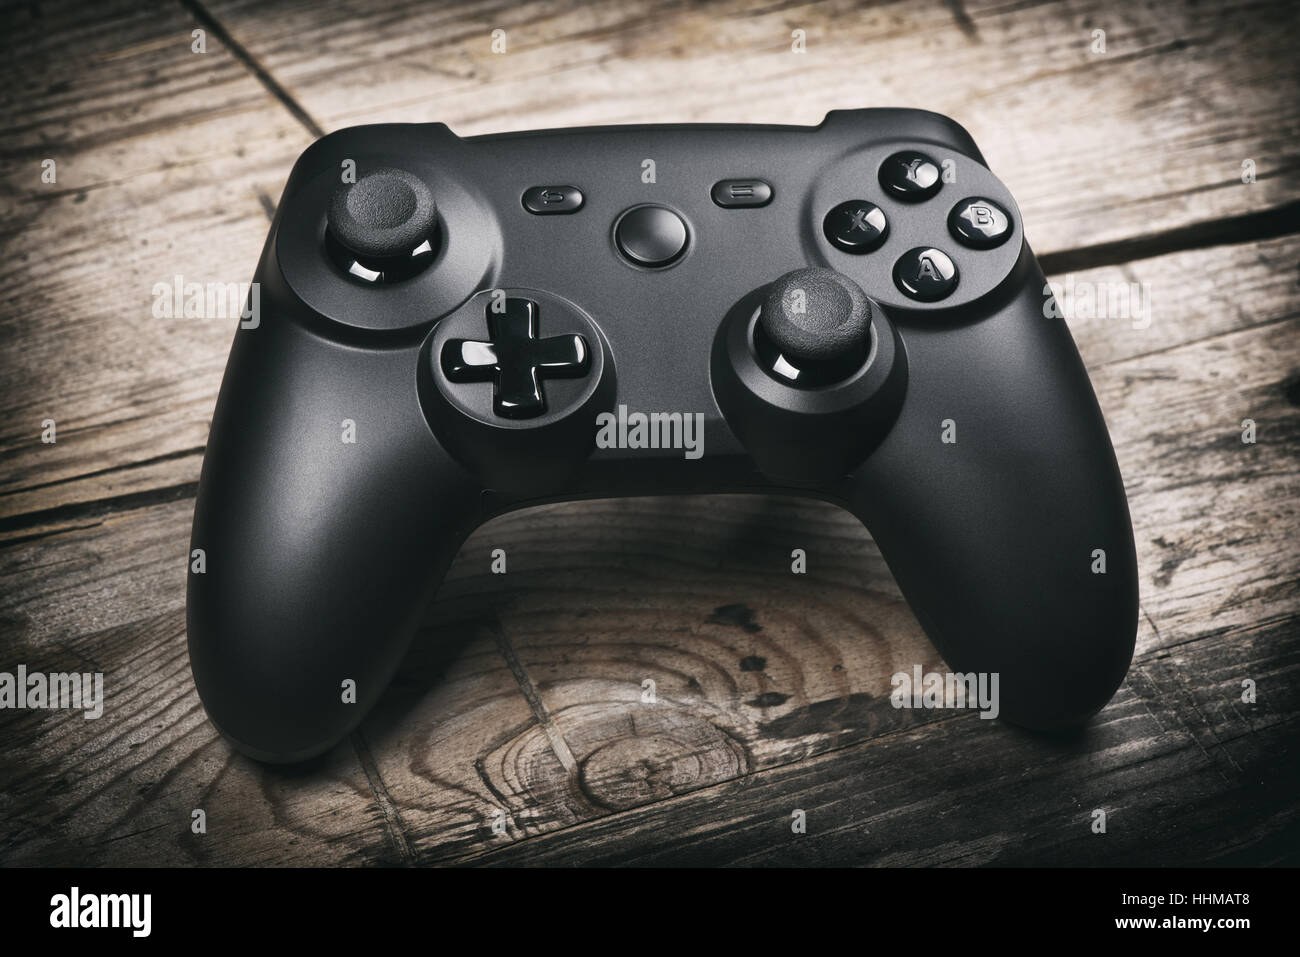 video game controller on a wooden table. joystick Stock Photo